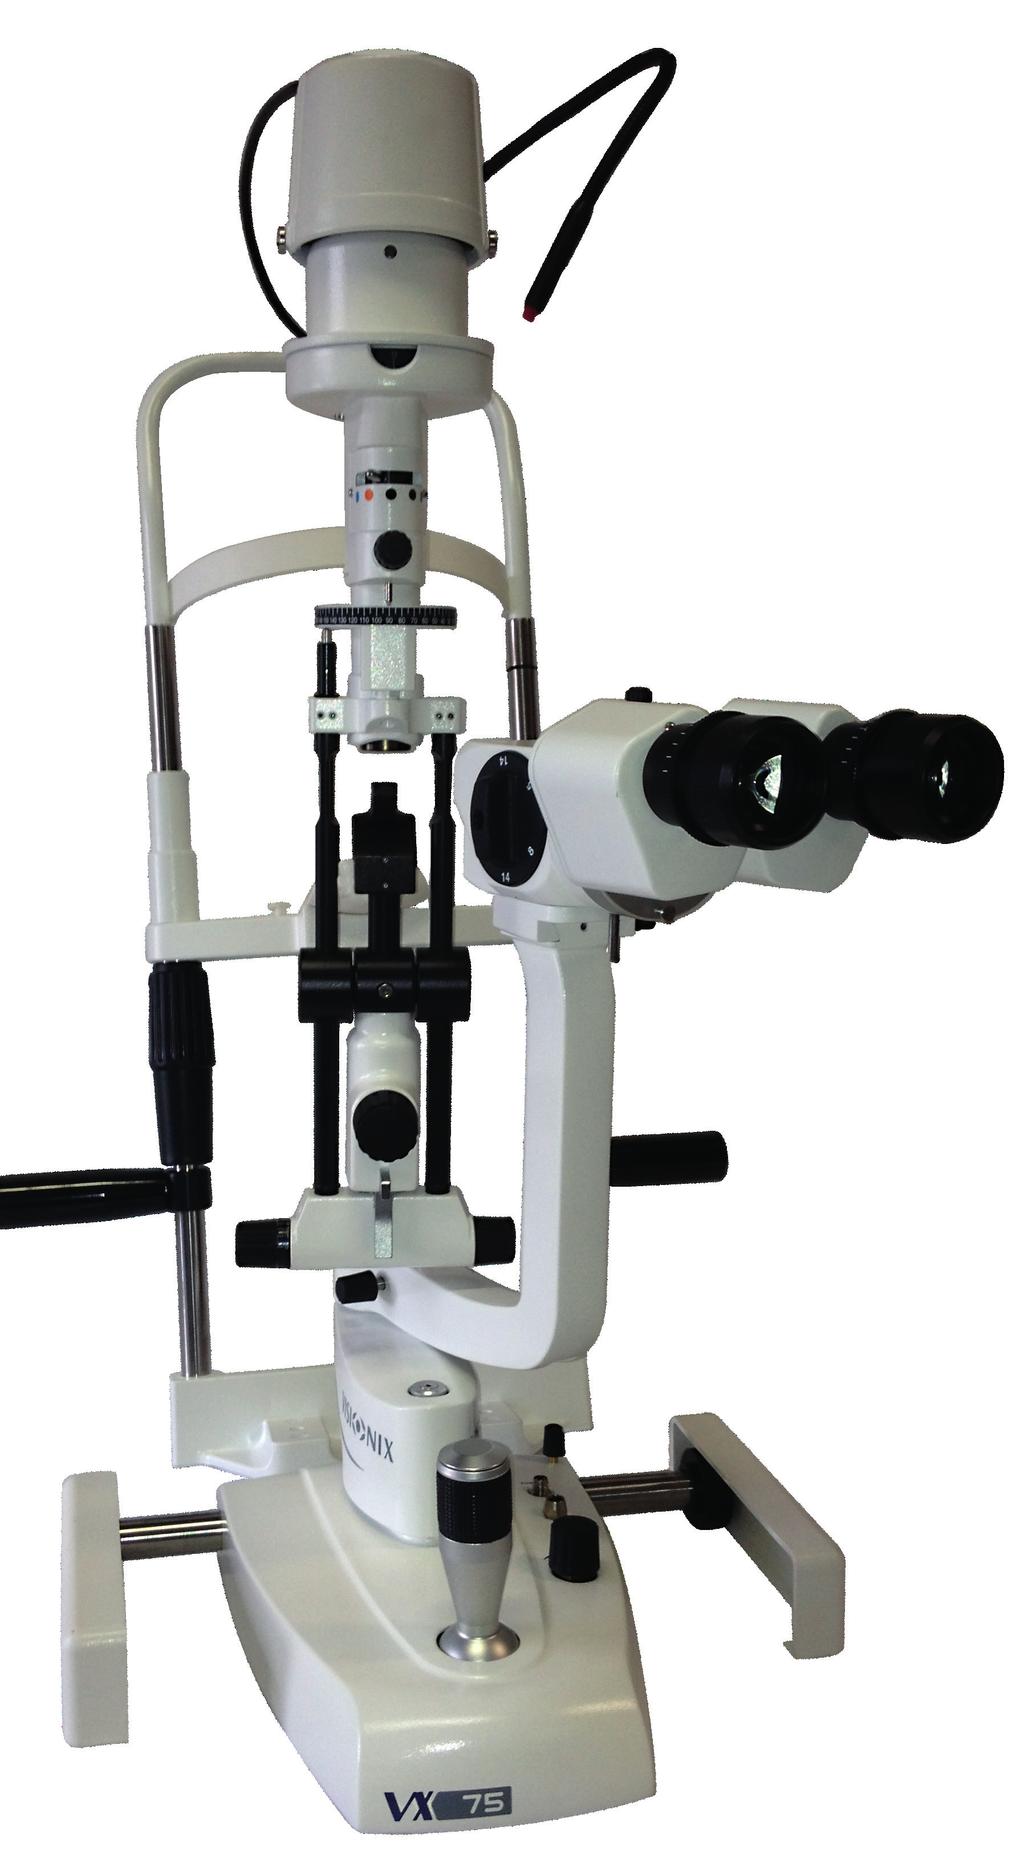 On the basis of well-recognised illumination concepts the operating features and illumination are positioned on top of the microscope. Excellent optics and brilliant image distinguish the VX75.